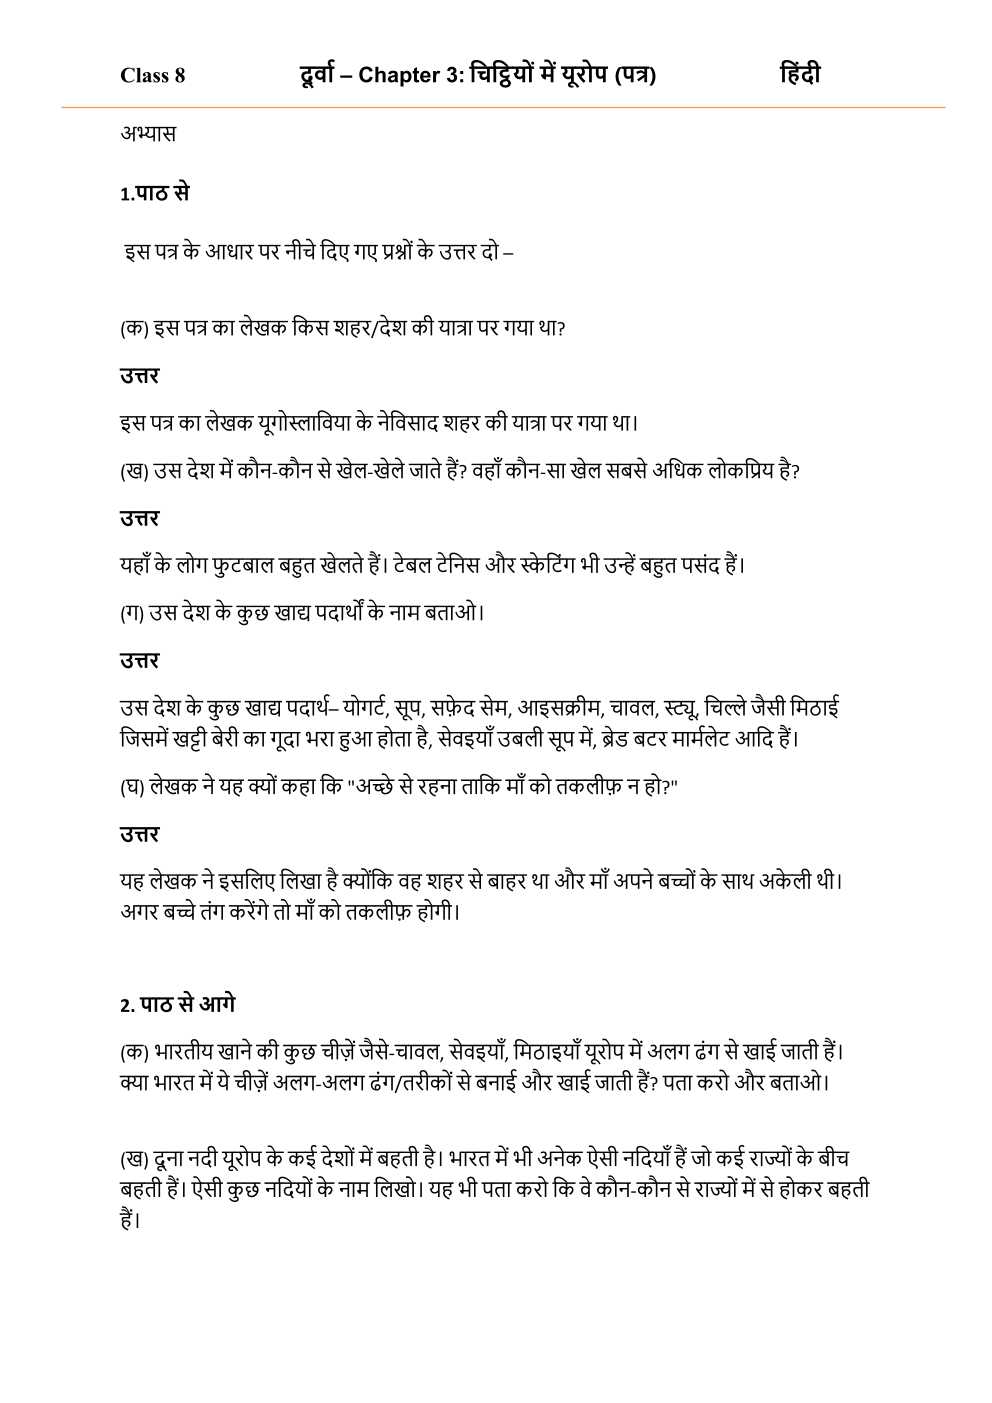 NCERT Solutions For Class 8 Hindi Durva Chapter 3